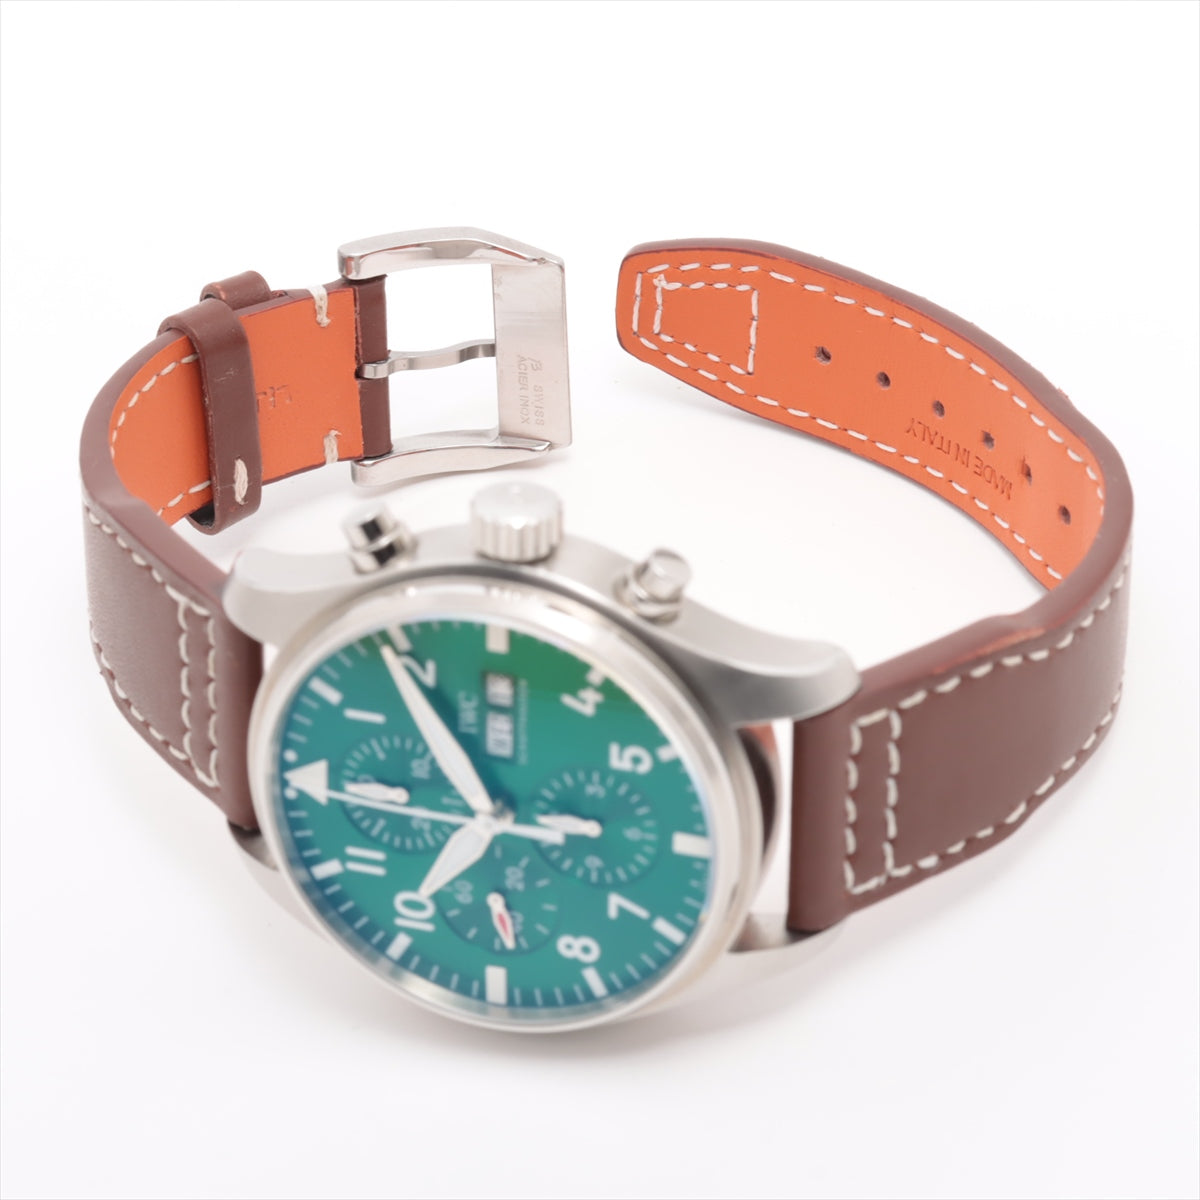 IWC Pilot Watch Chronograph Racing Green IW377726 SS Leather AT Green Signboard